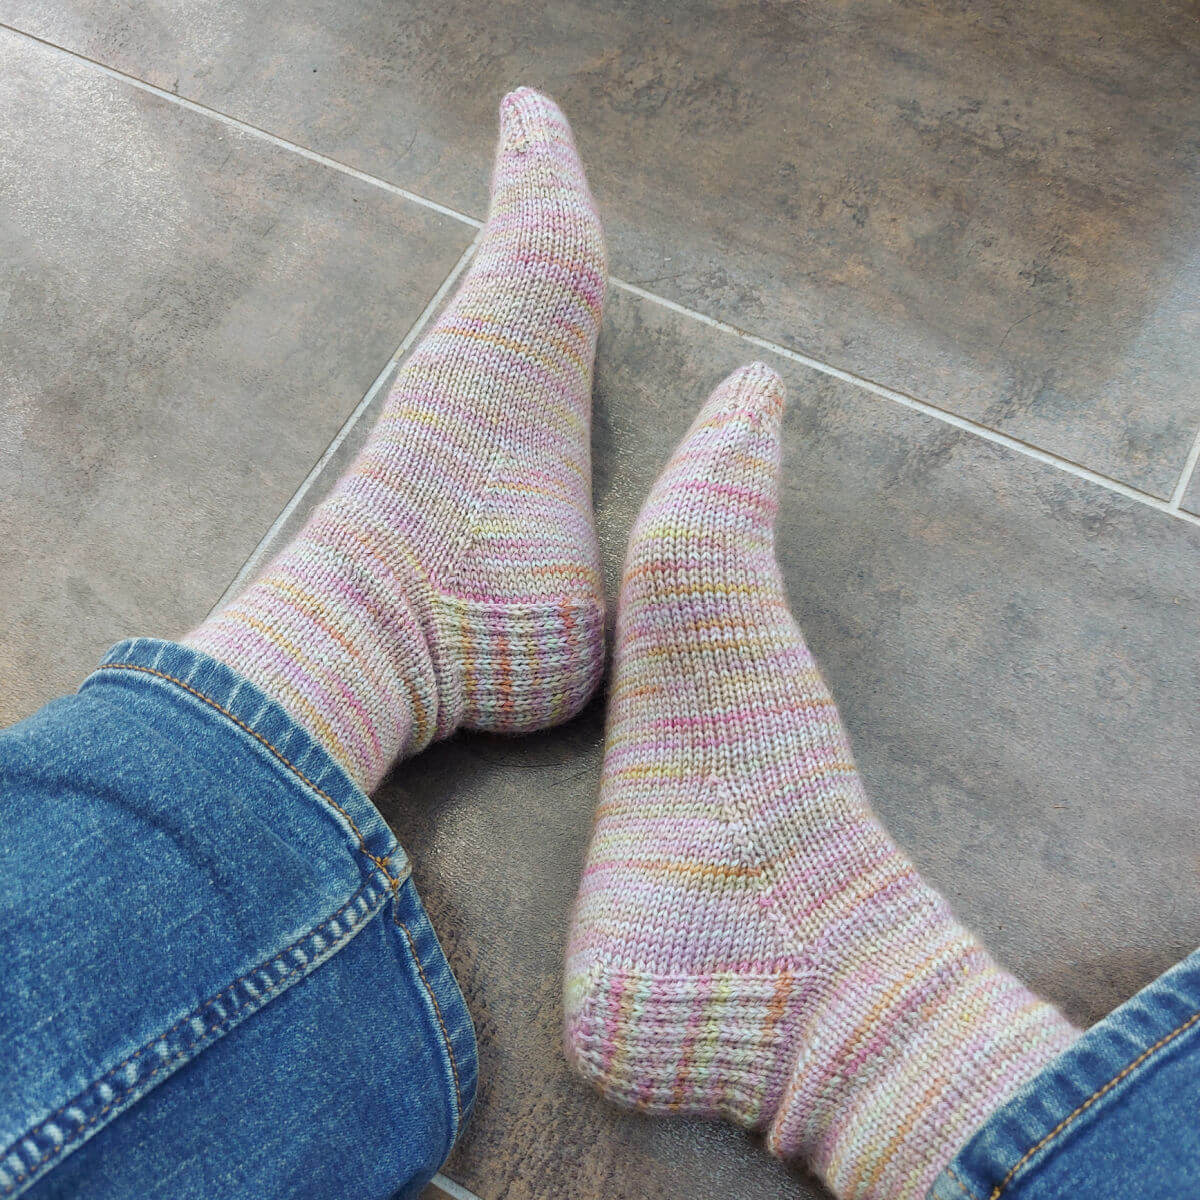 Christine is sitting on a brown and copper-coloured tiled floor showing off a pair of hand knitted socks in pastel shades that give an overall purple tone. She's also wearing her jeans.